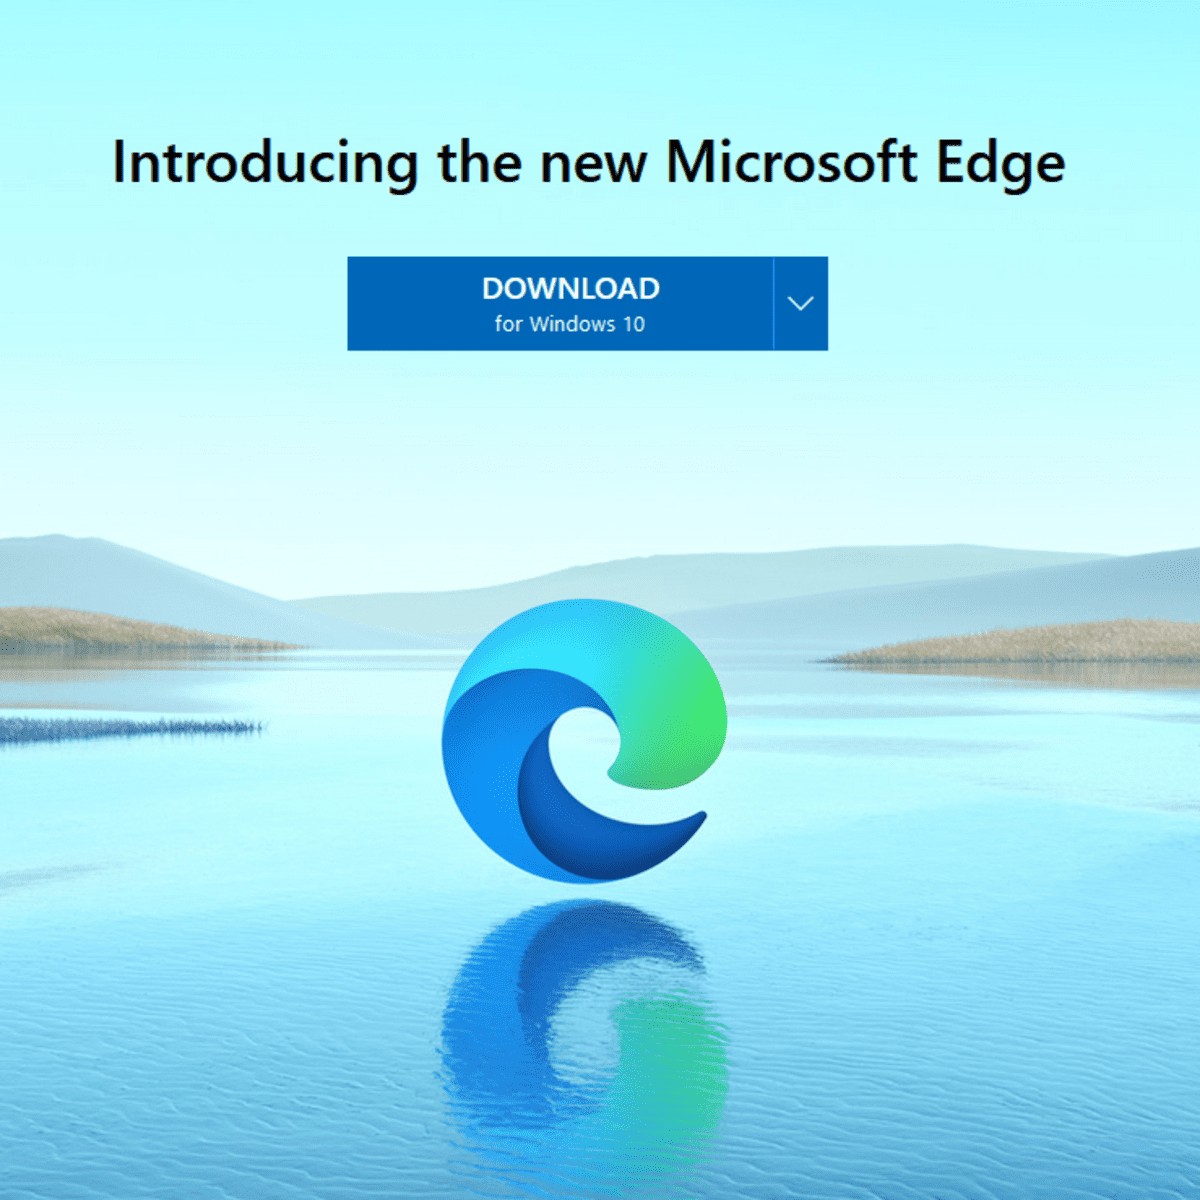 How to install Paper Chrome Extension in Microsoft Edge? – Paper